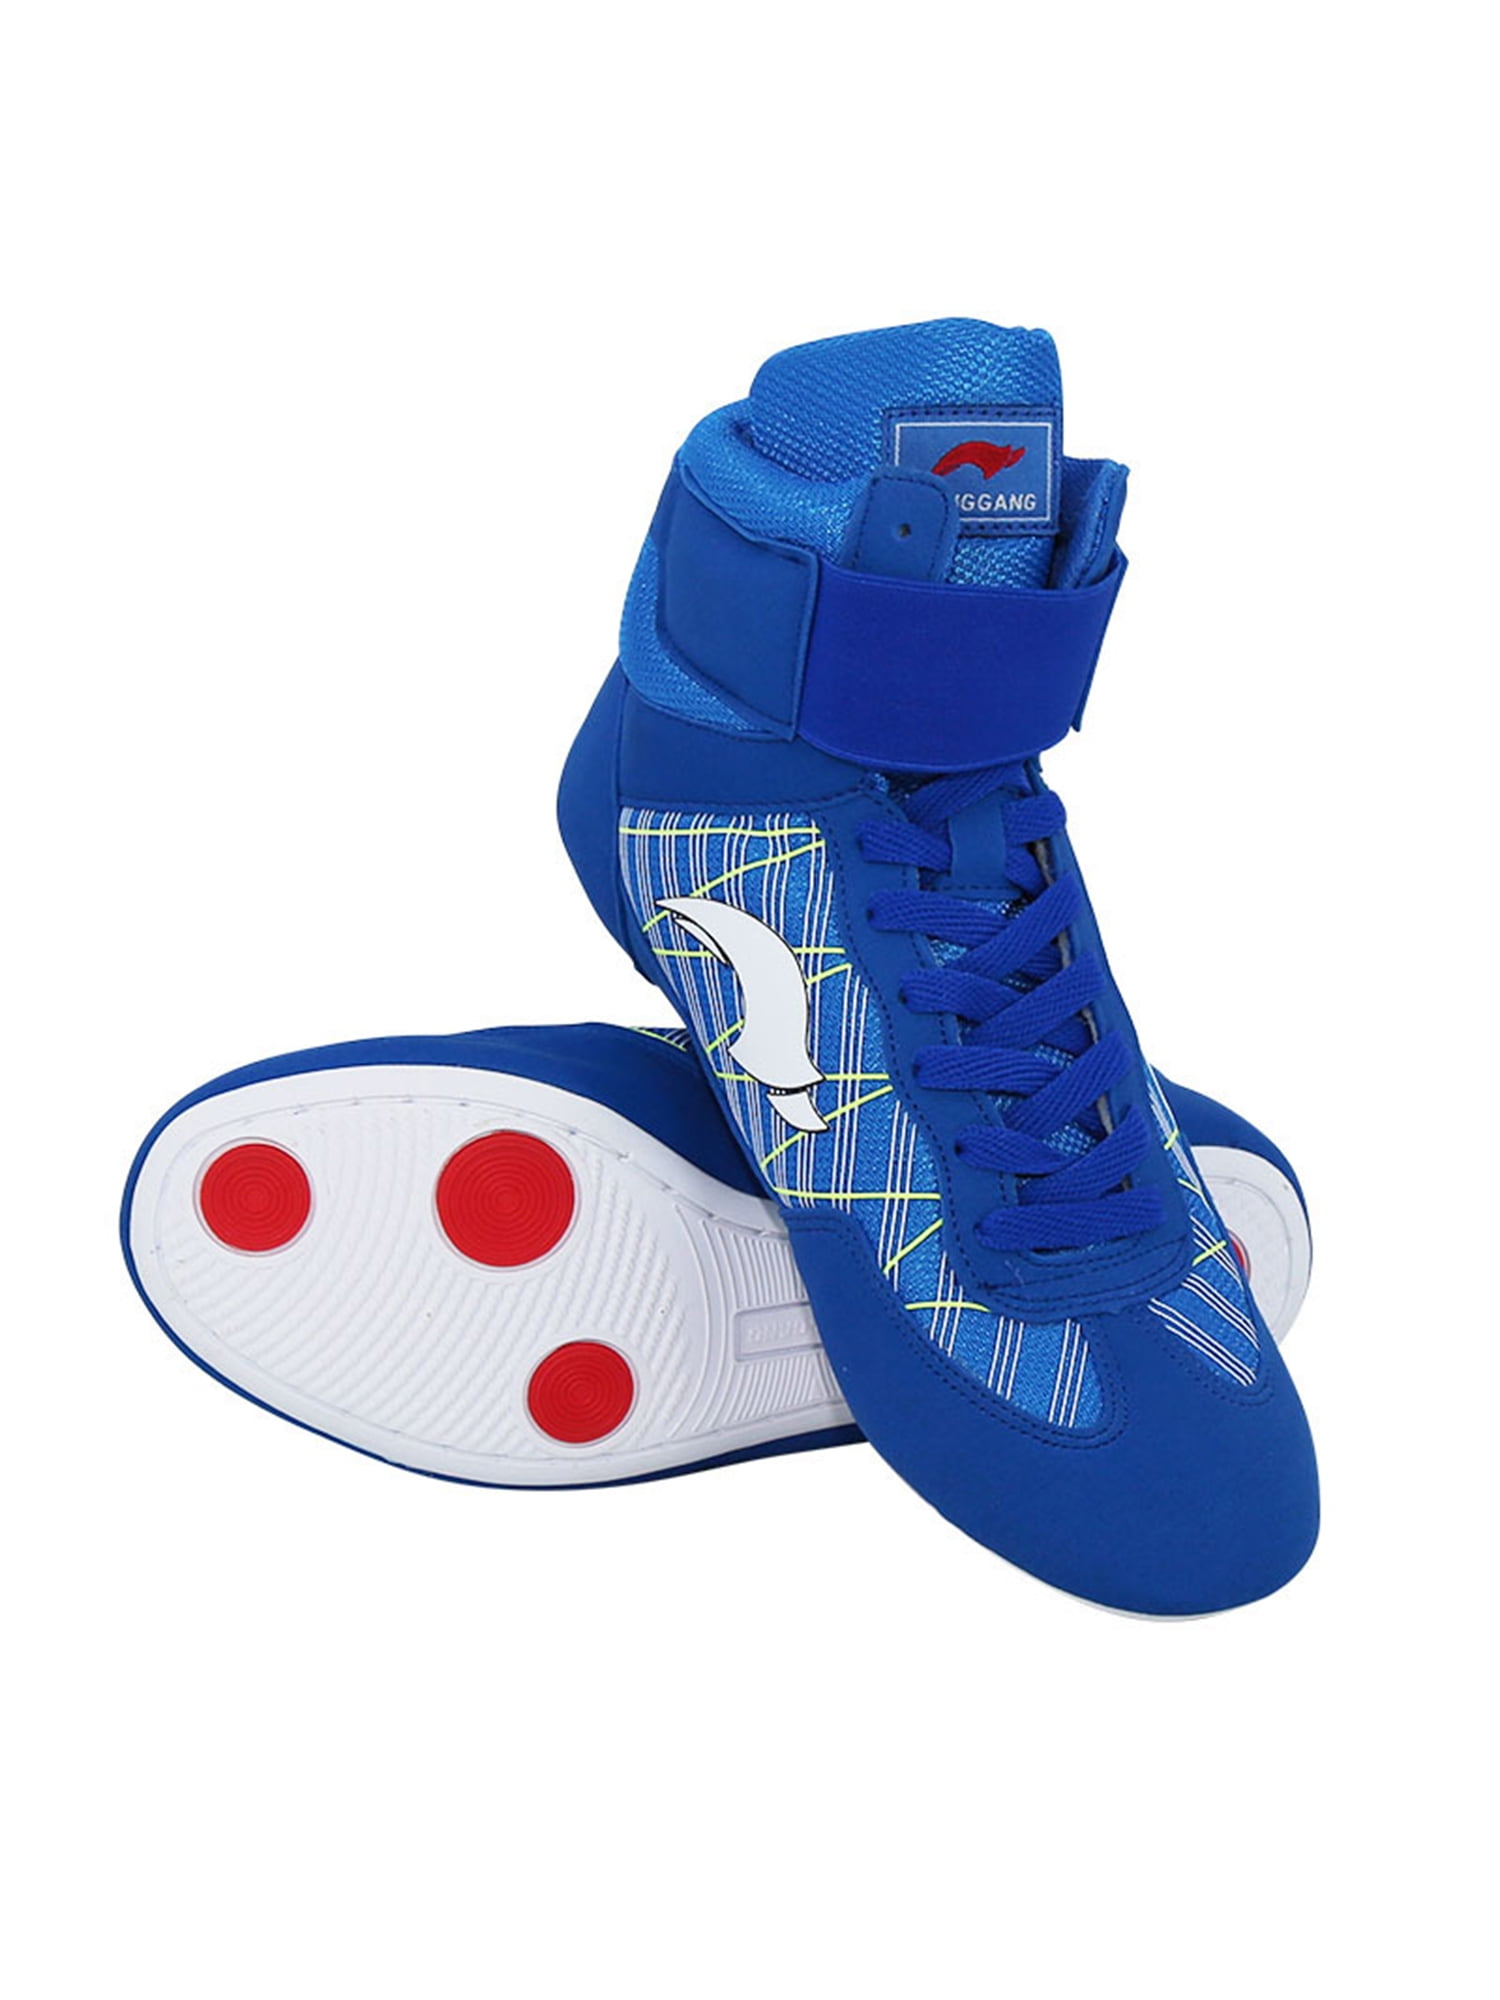 Boys Day Key Breathable Wrestling Shoes for Men Kids Youth 